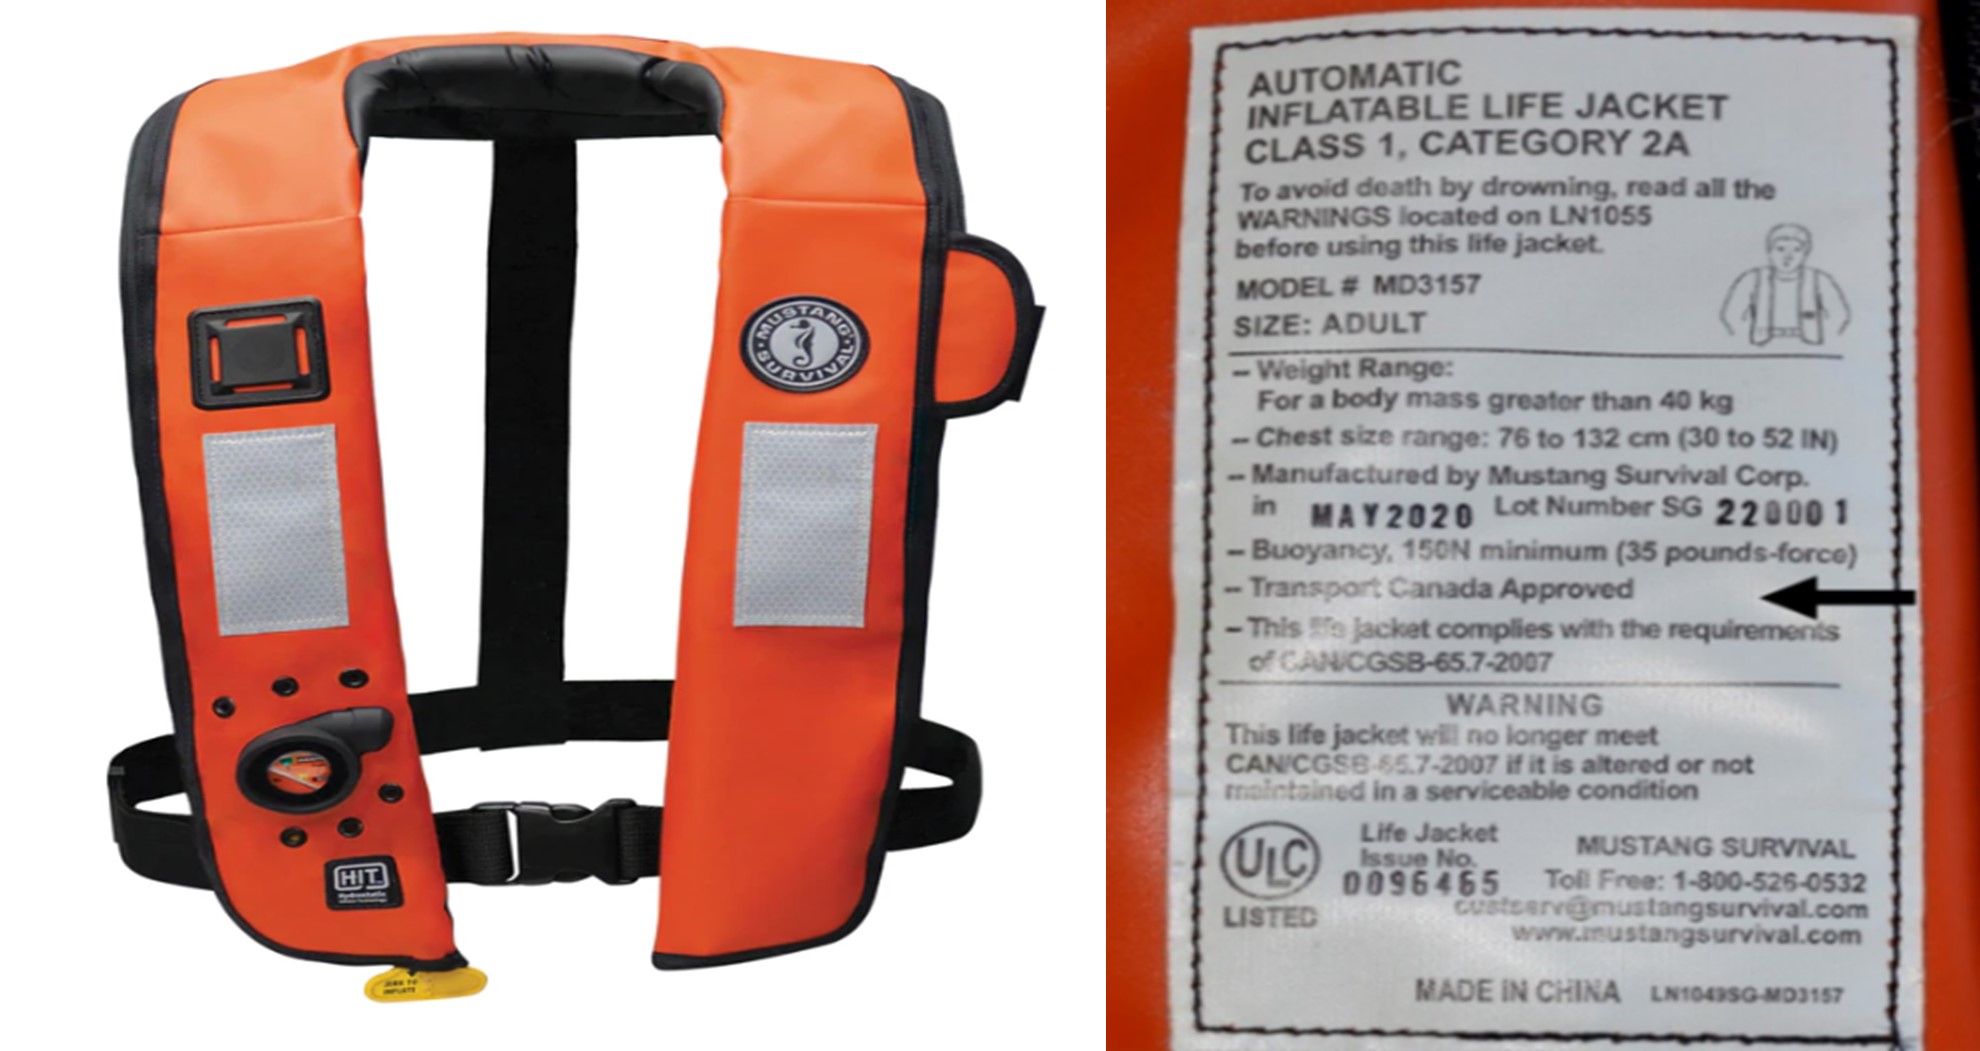 Photo of the type of personal flotation device worn by the occurrence pilot (left) and its identification tag (right) (Source: Mustang Survival, with TSB annotations)